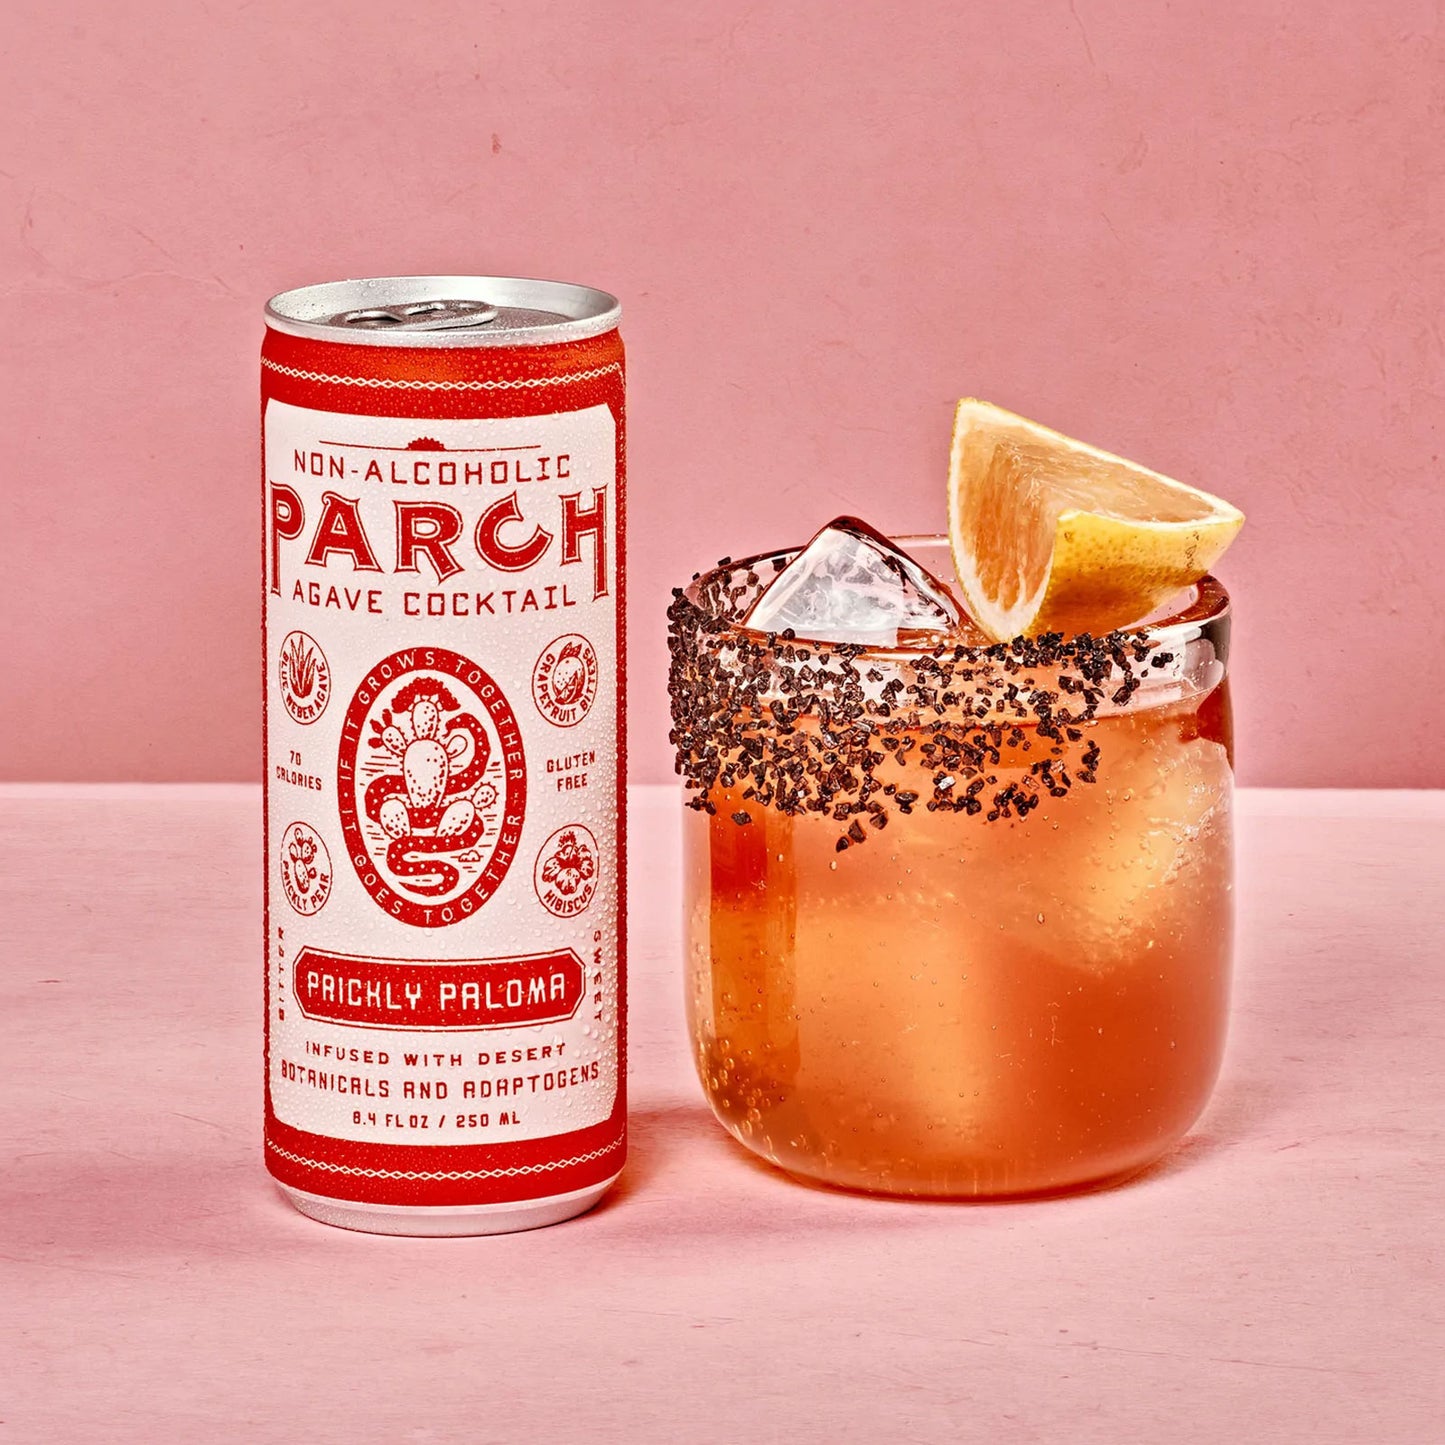 PARCH Prickly Paloma Non-Alcoholic Agave Cocktail, 4-Pack